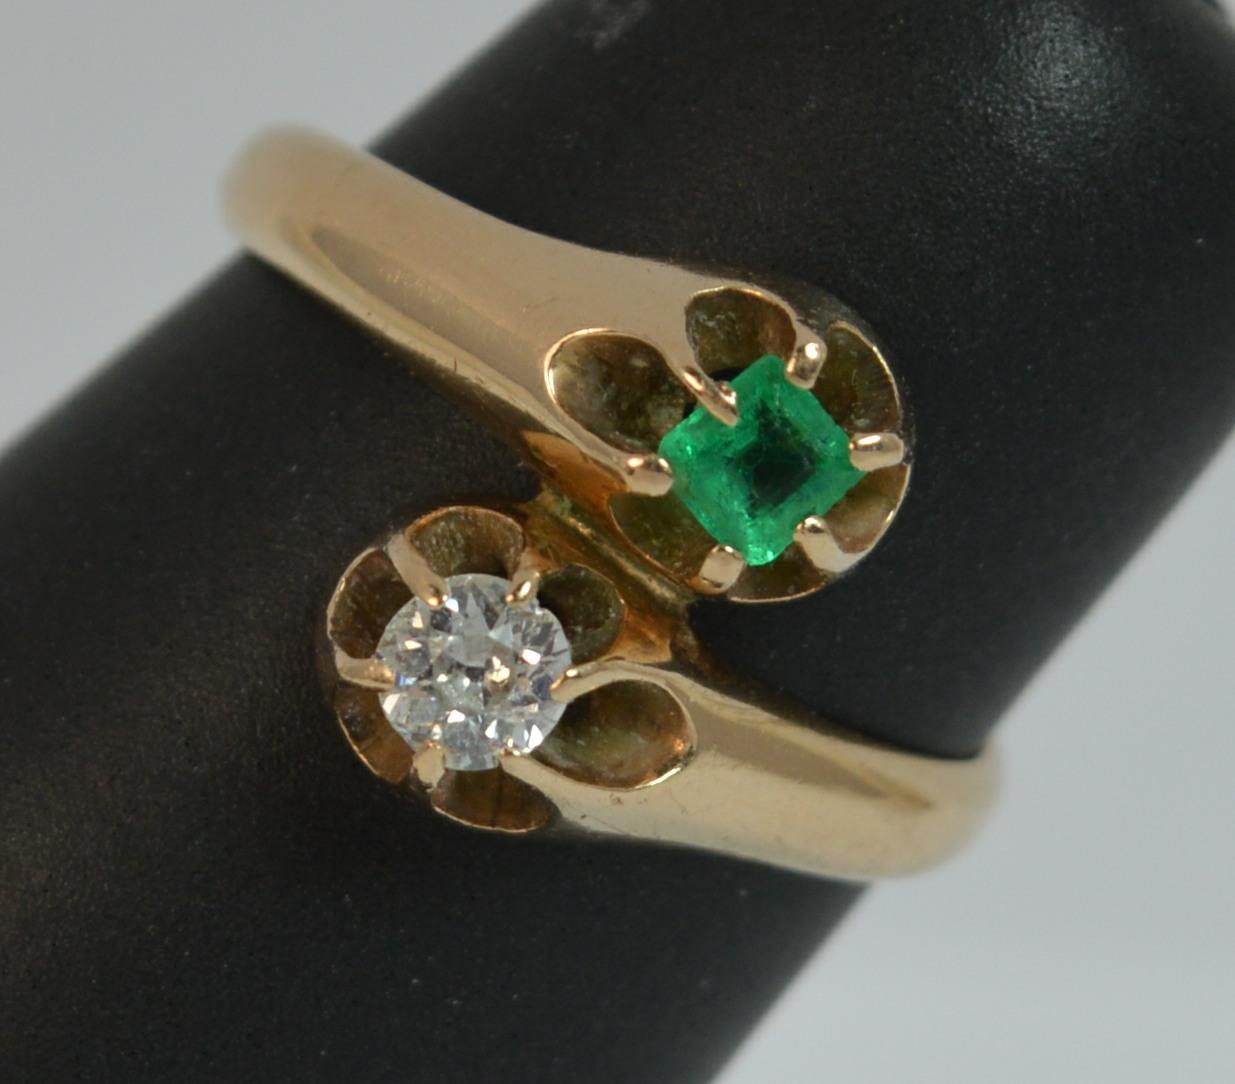 
A LADIES DIAMOND, 14ct GOLD EMERALD AND DIAMOND RING.

A TRUE ANTIQUE PIECE c1890.

A TWIST TOI ET MOI DESIGN SET WITH A NATURAL OLD EUROPEAN CUT DIAMOND, 0.15cts AND AN EMERALD CUT EMERALD. 11.5mm WIDE TO FRONT.

SIZE K 1/2 UK, 5 1/4 US. 2.4